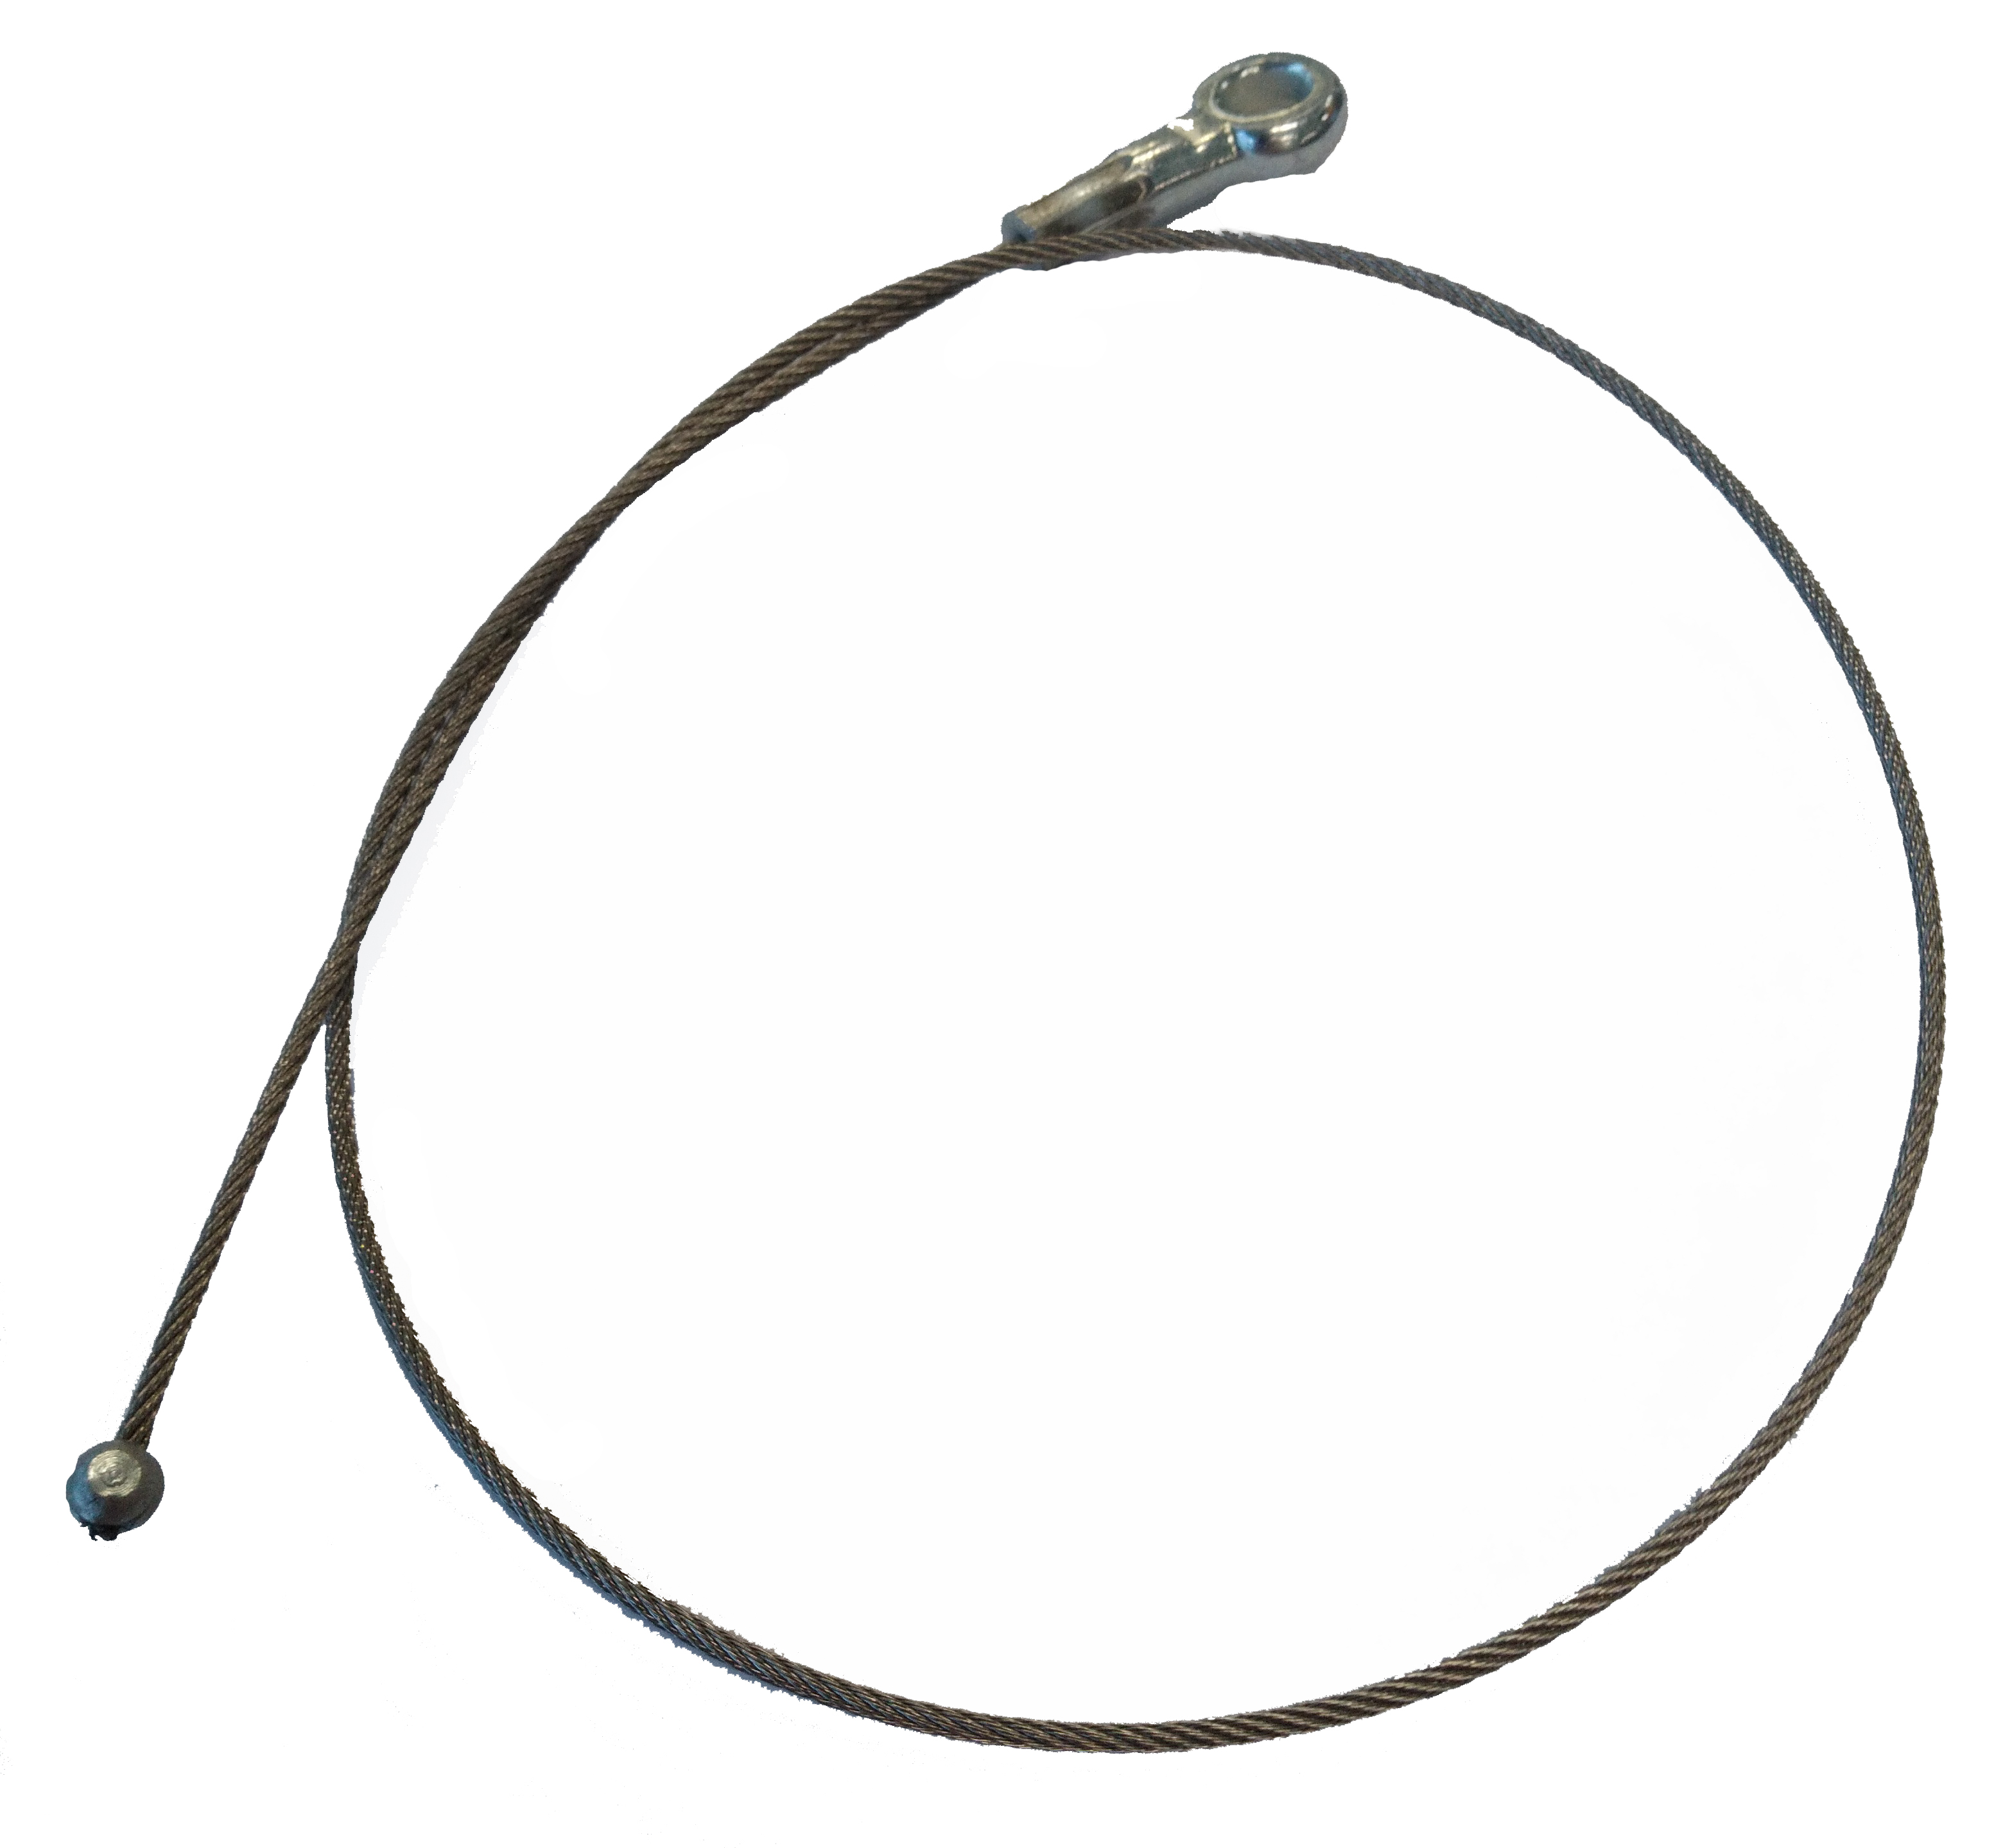 Dustbane® Replacement Cable for Dustbane® 500 Machines